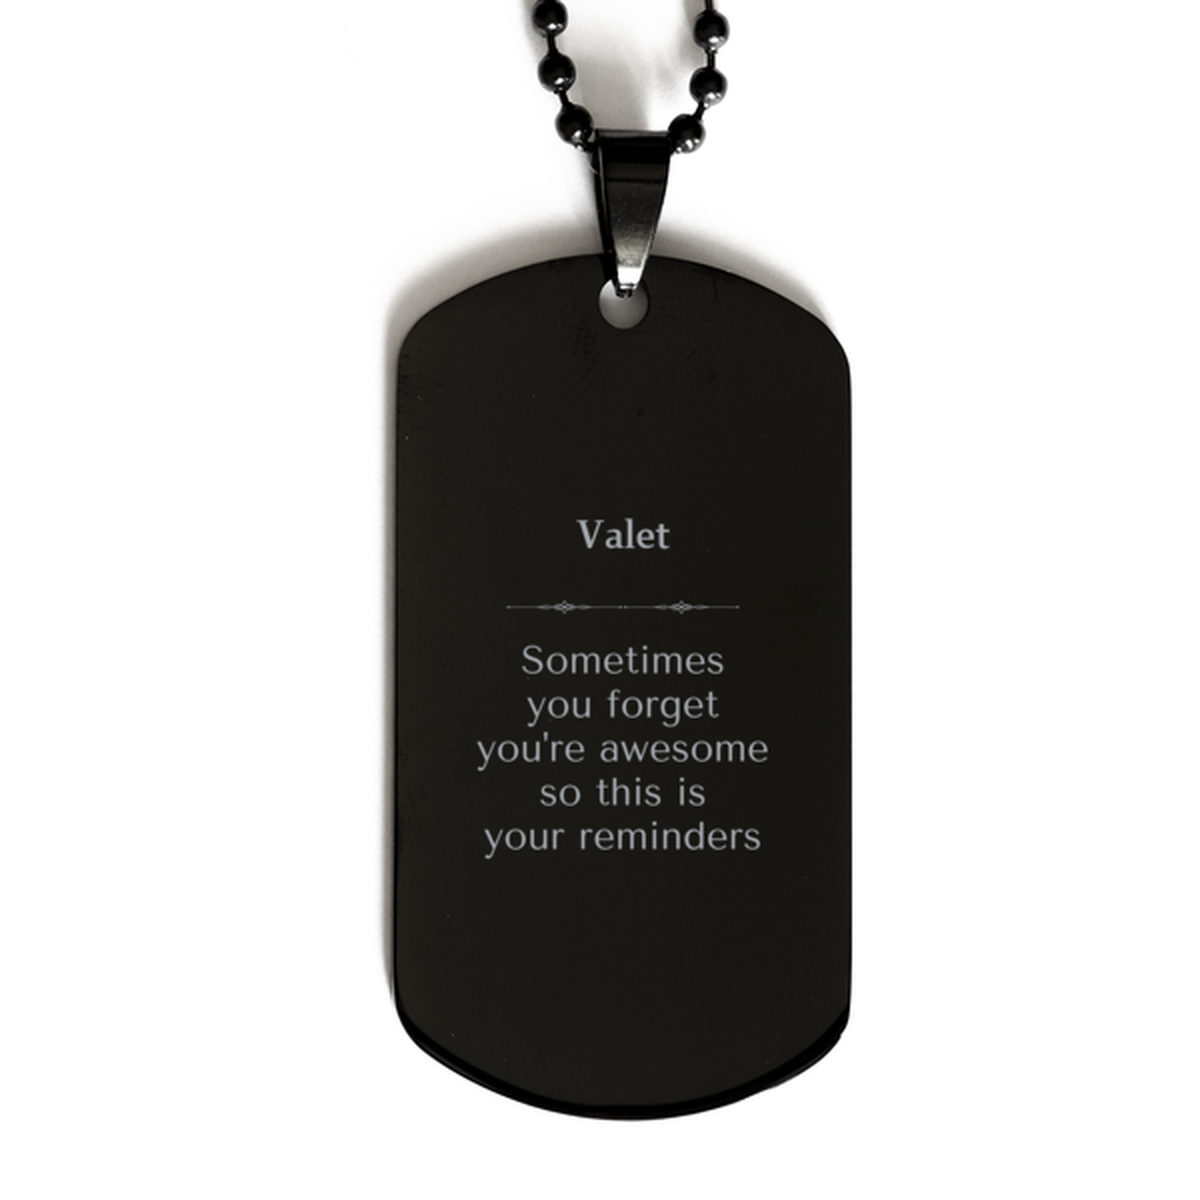 Sentimental Valet Black Dog Tag, Valet Sometimes you forget you're awesome so this is your reminders, Graduation Christmas Birthday Gifts for Valet, Men, Women, Coworkers